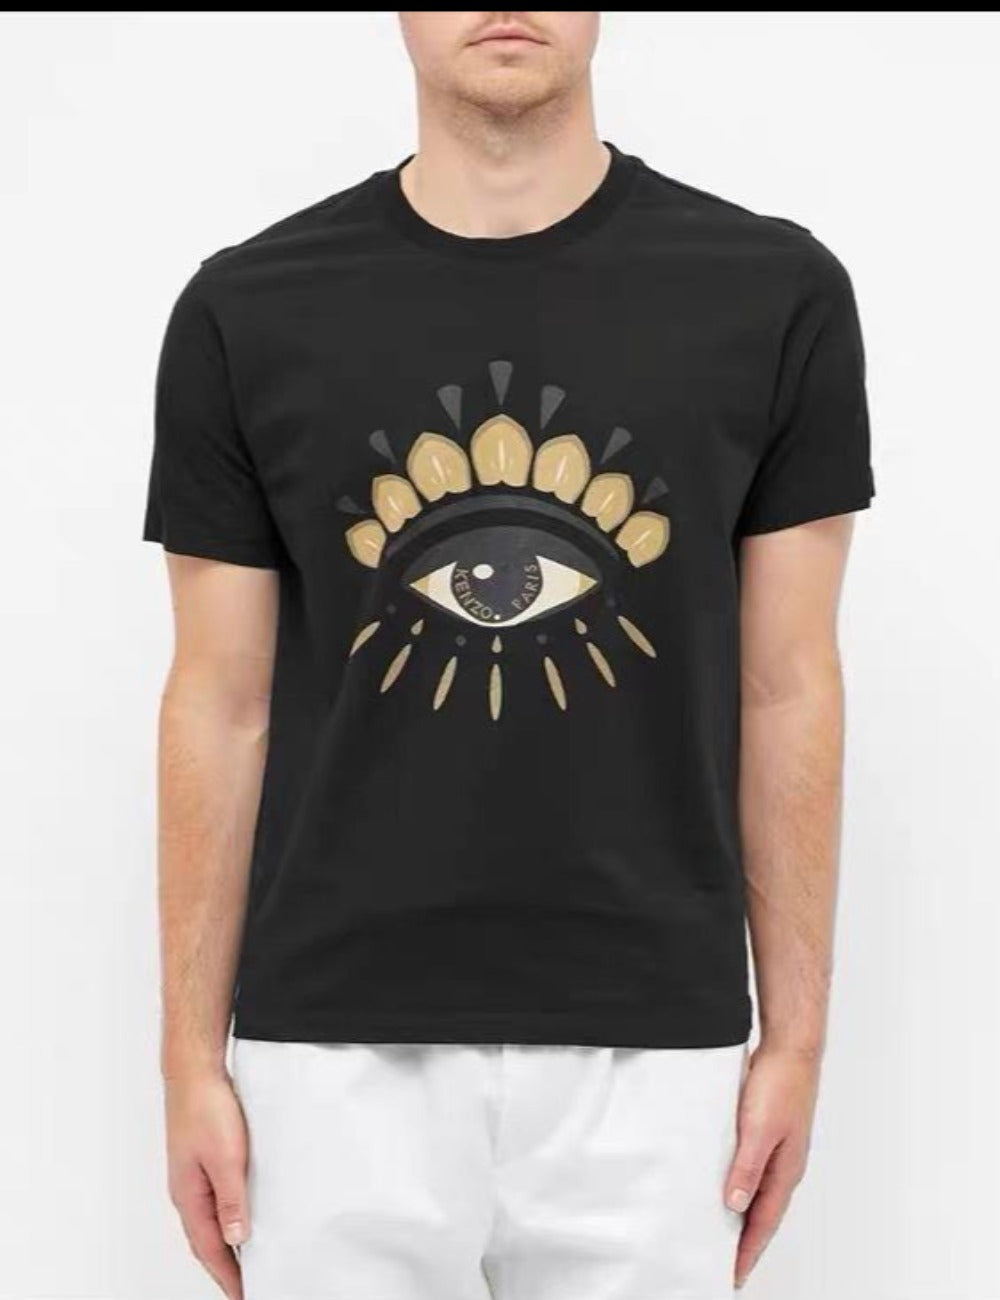 Kenzo Gold Eye Logo T-Shirt - Shop Streetwear, Sneakers, Slippers and Gifts online | Malaysia - The Factory KL